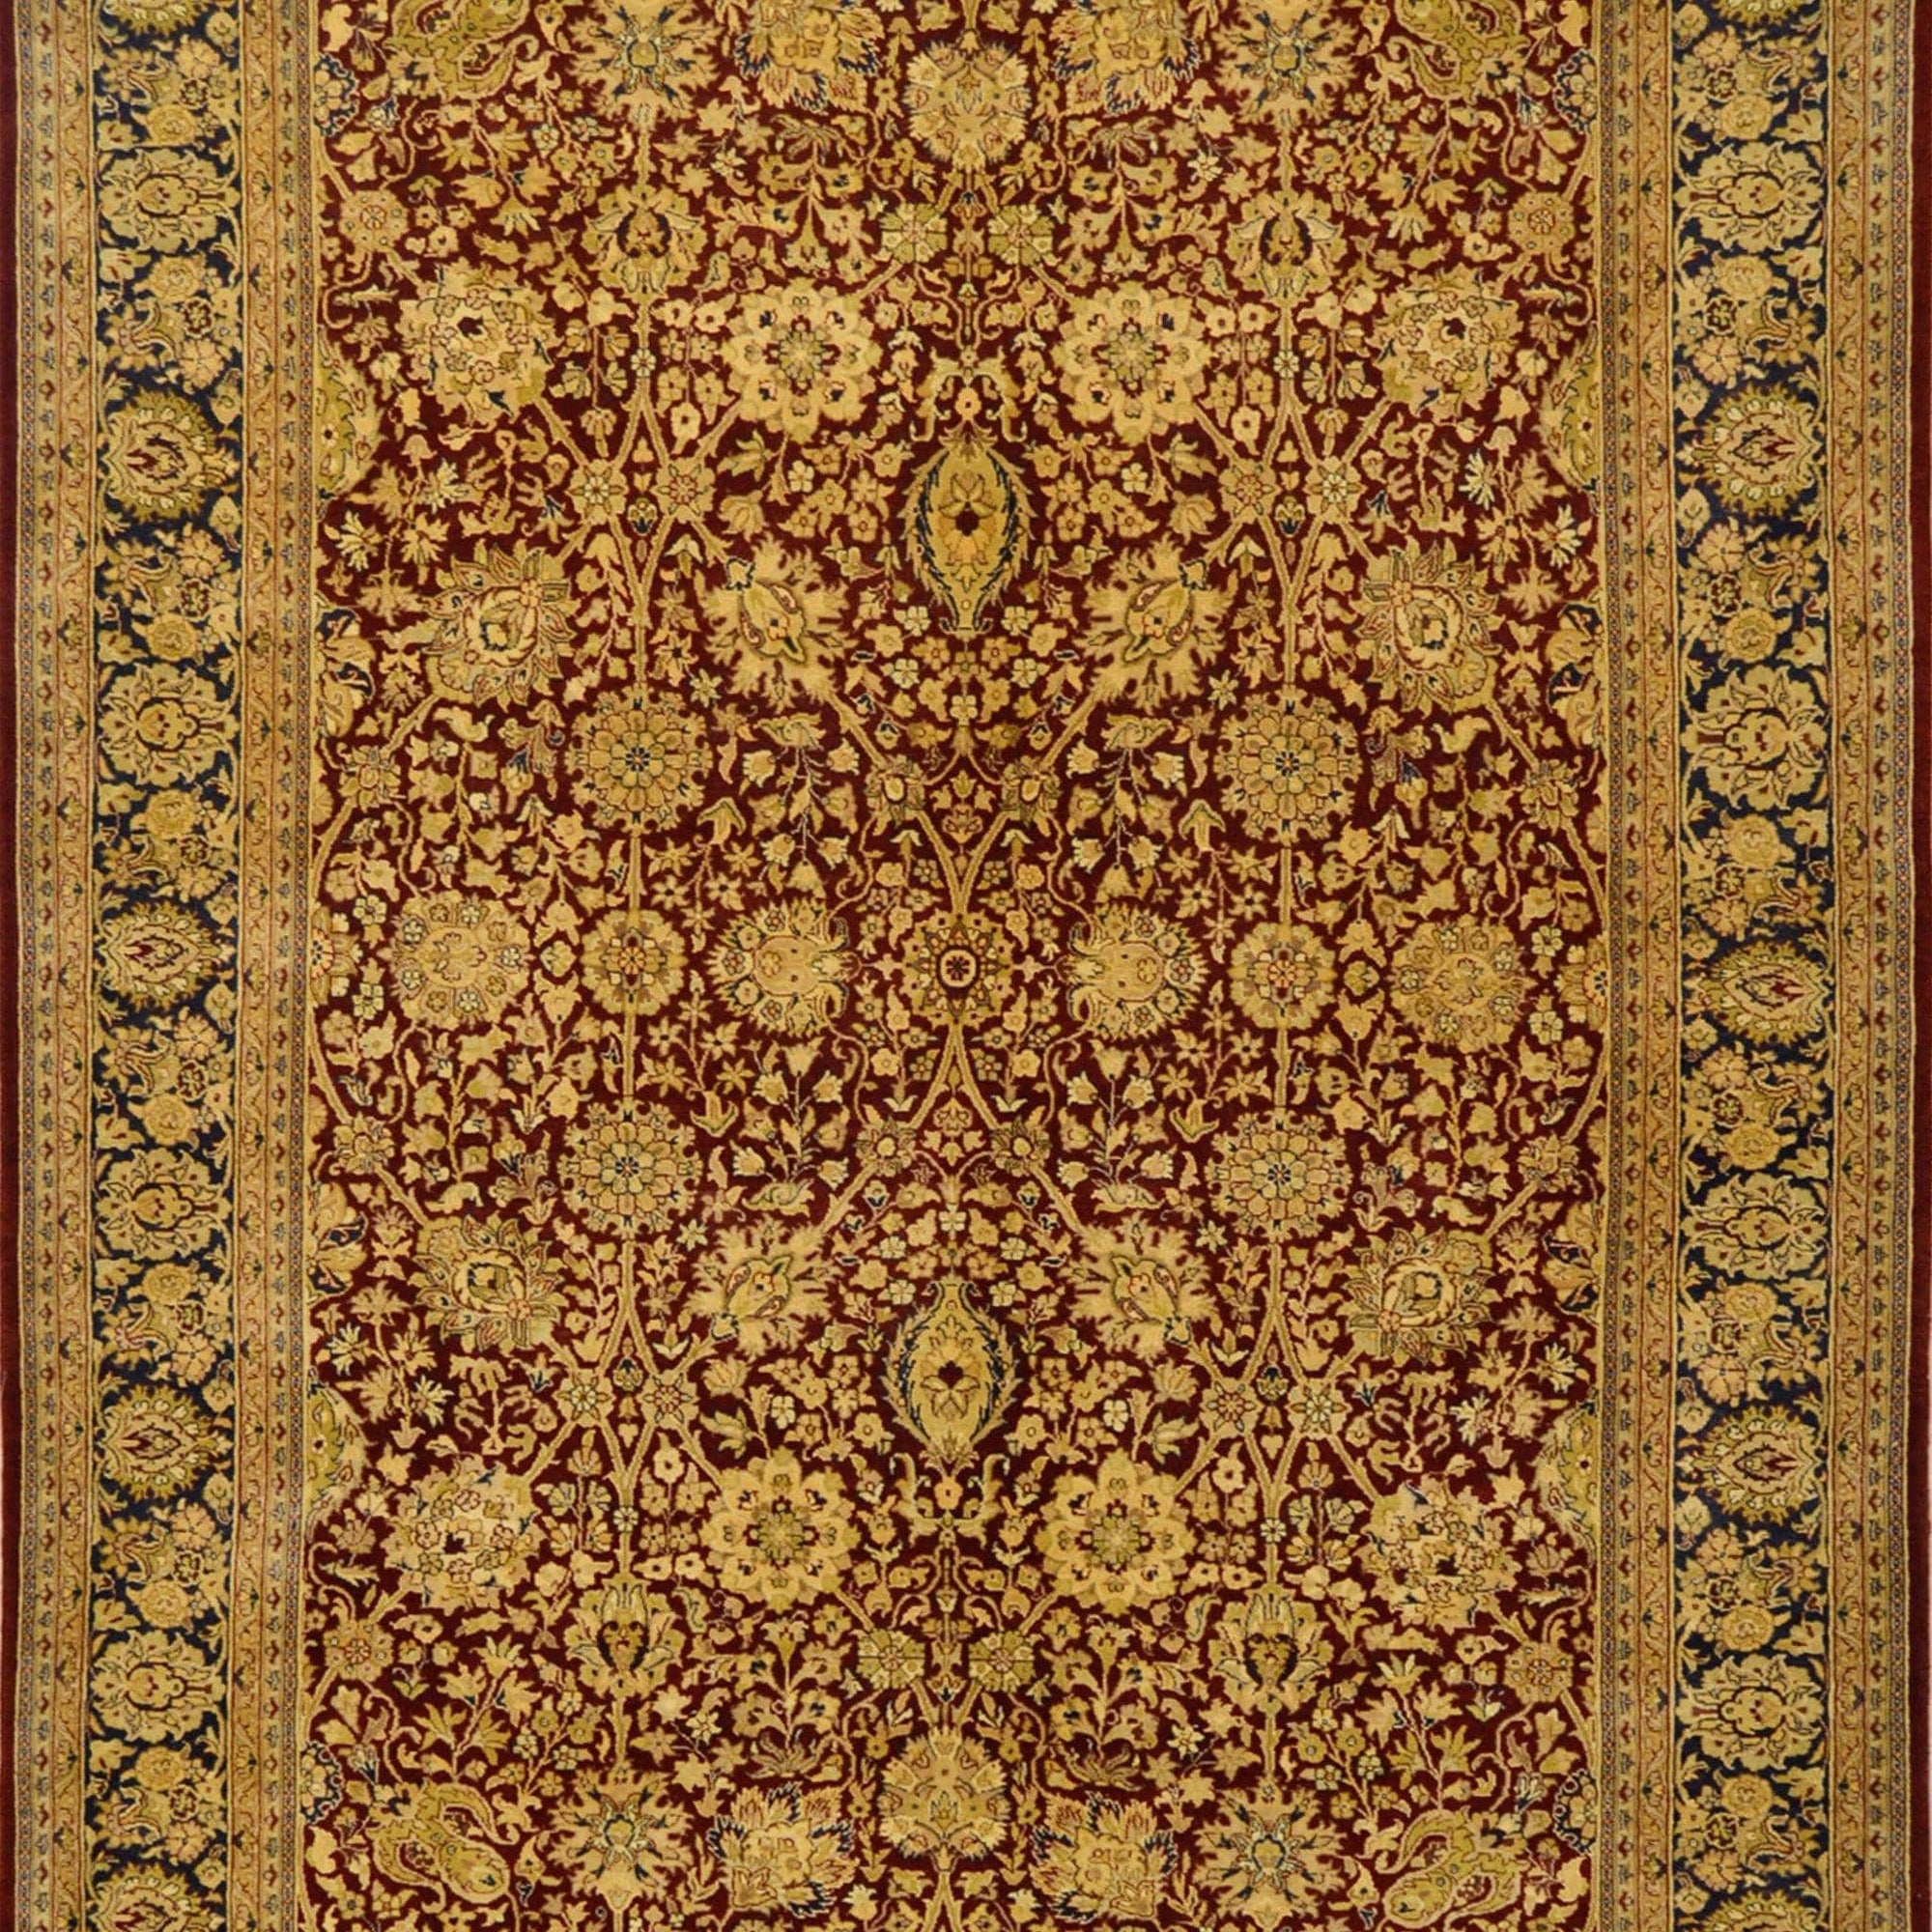 Fine Hand-knotted Wool Kashan Rug 183cm x 275cm